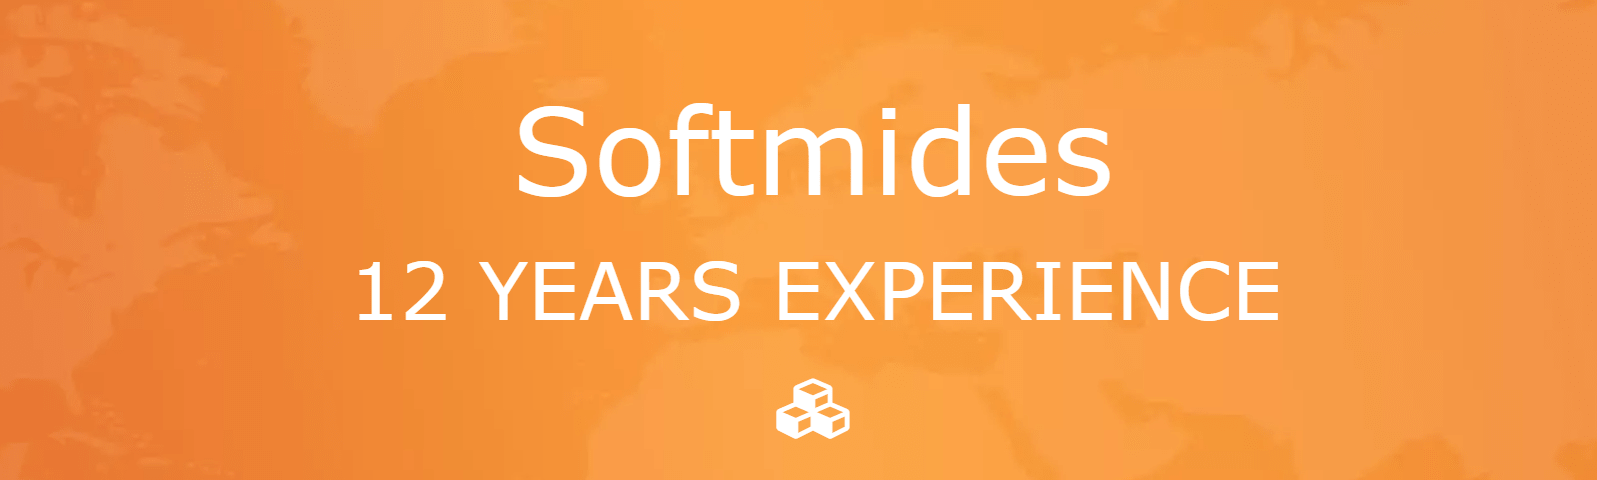 Softmides Home page 2013